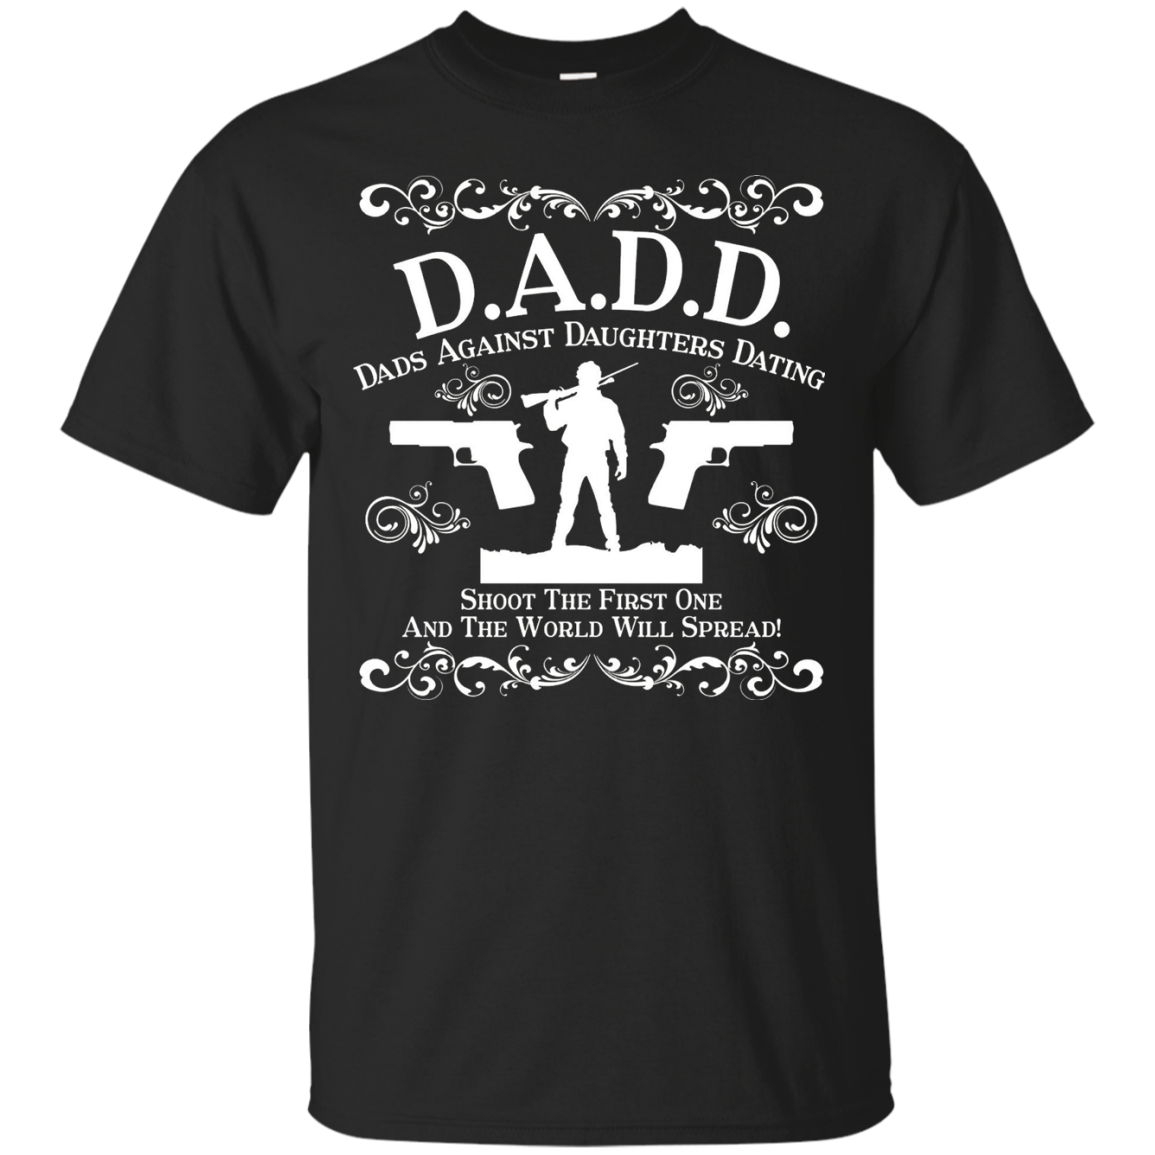 Dad T-shirt , D.A.D.D Dads against Daughters Dating Shoot th